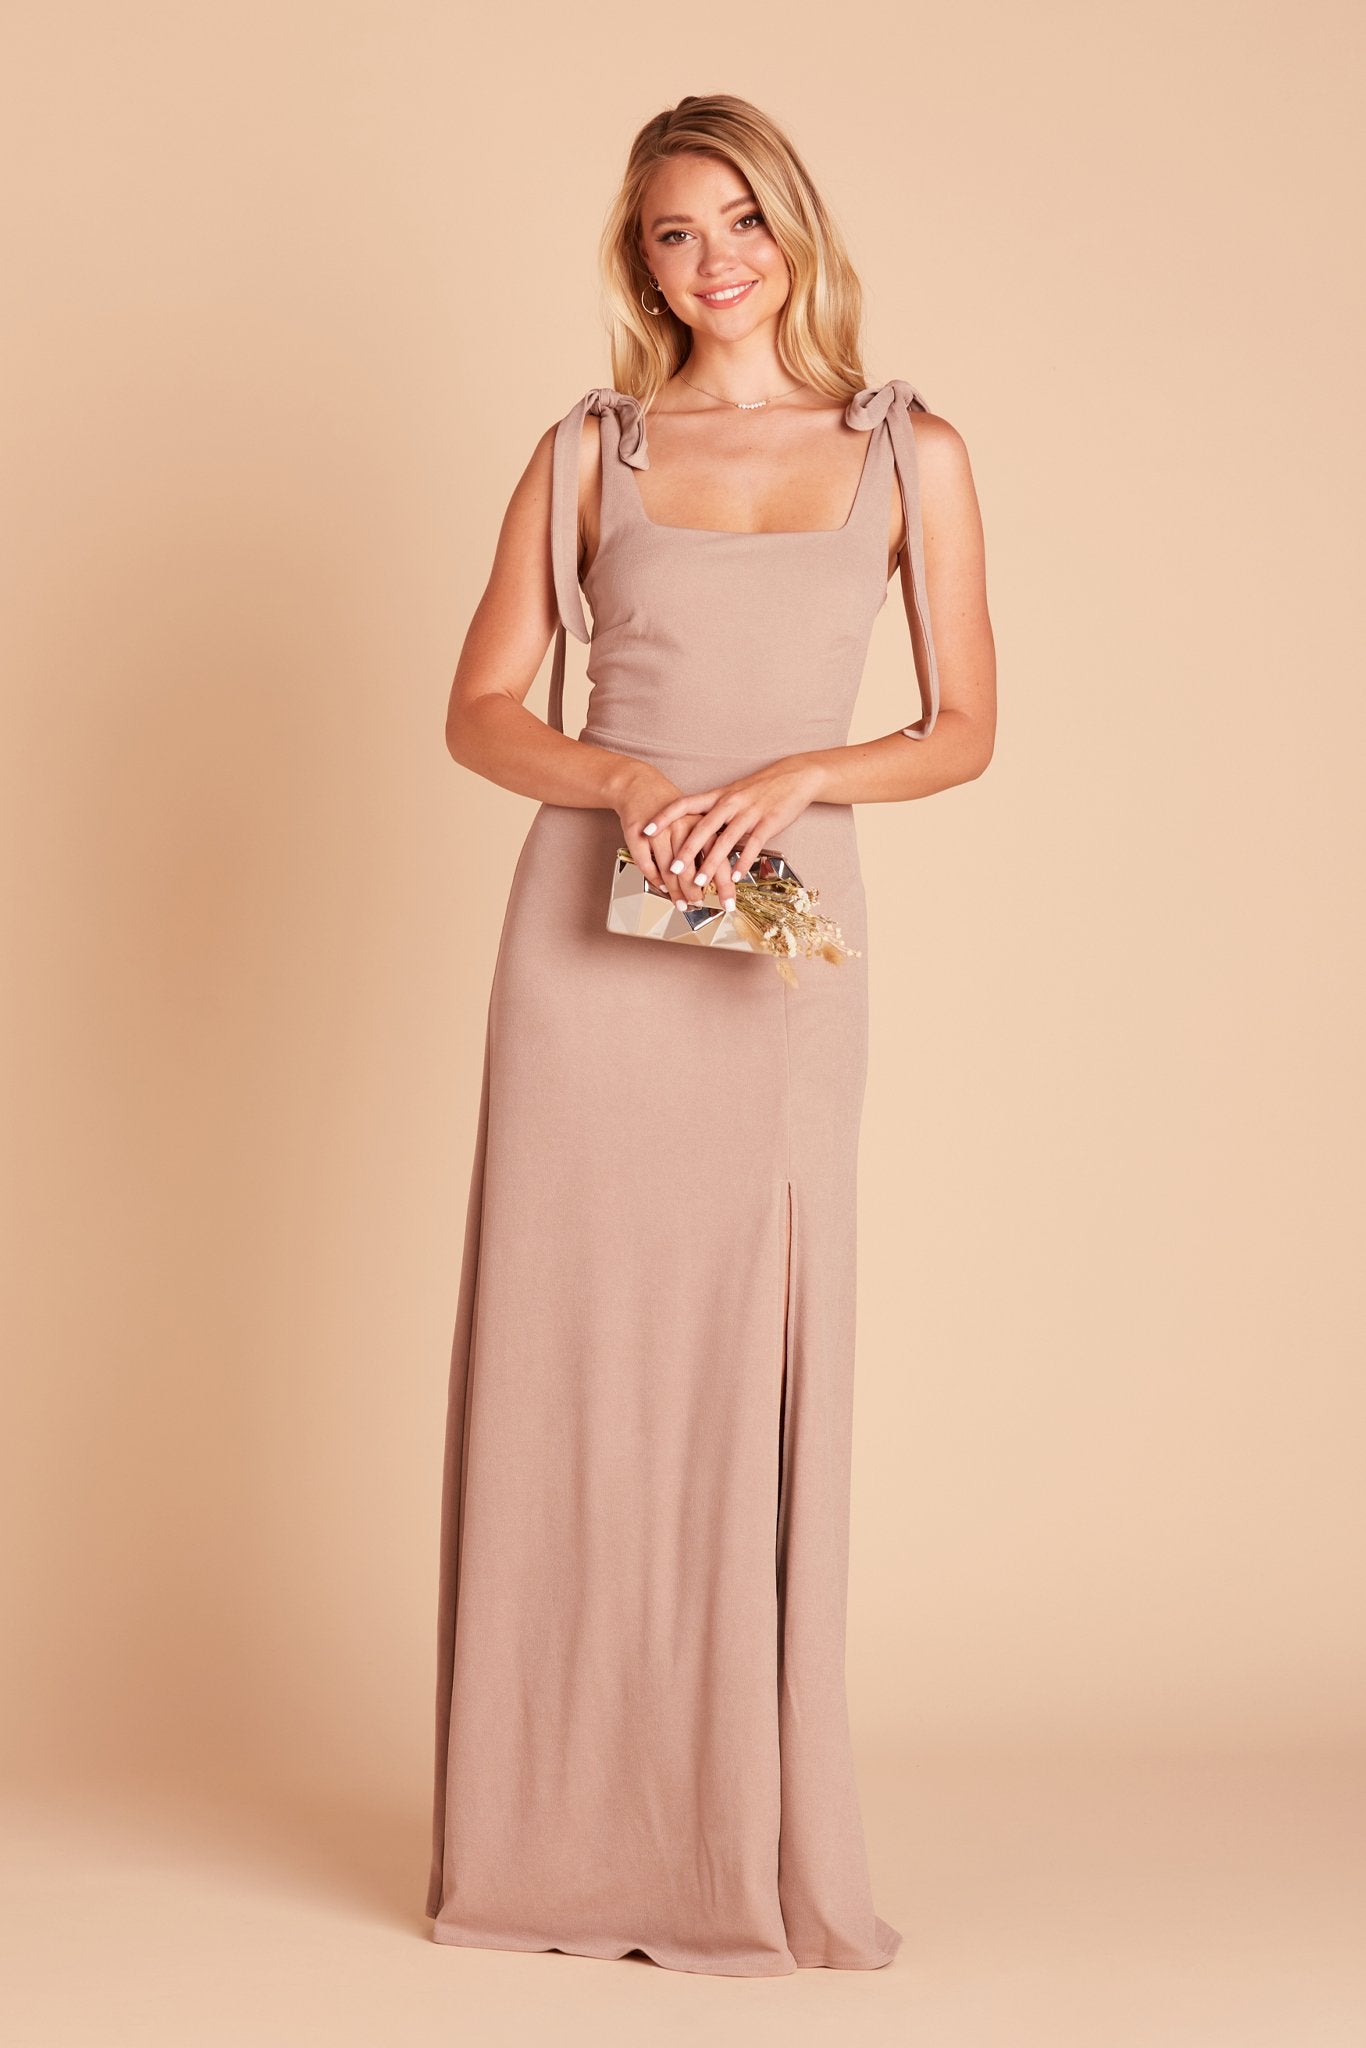 Front view of the Alex Convertible Bridesmaid Dress in taupe with shoulder ties that are tied in a bow and draped down over each shoulder.